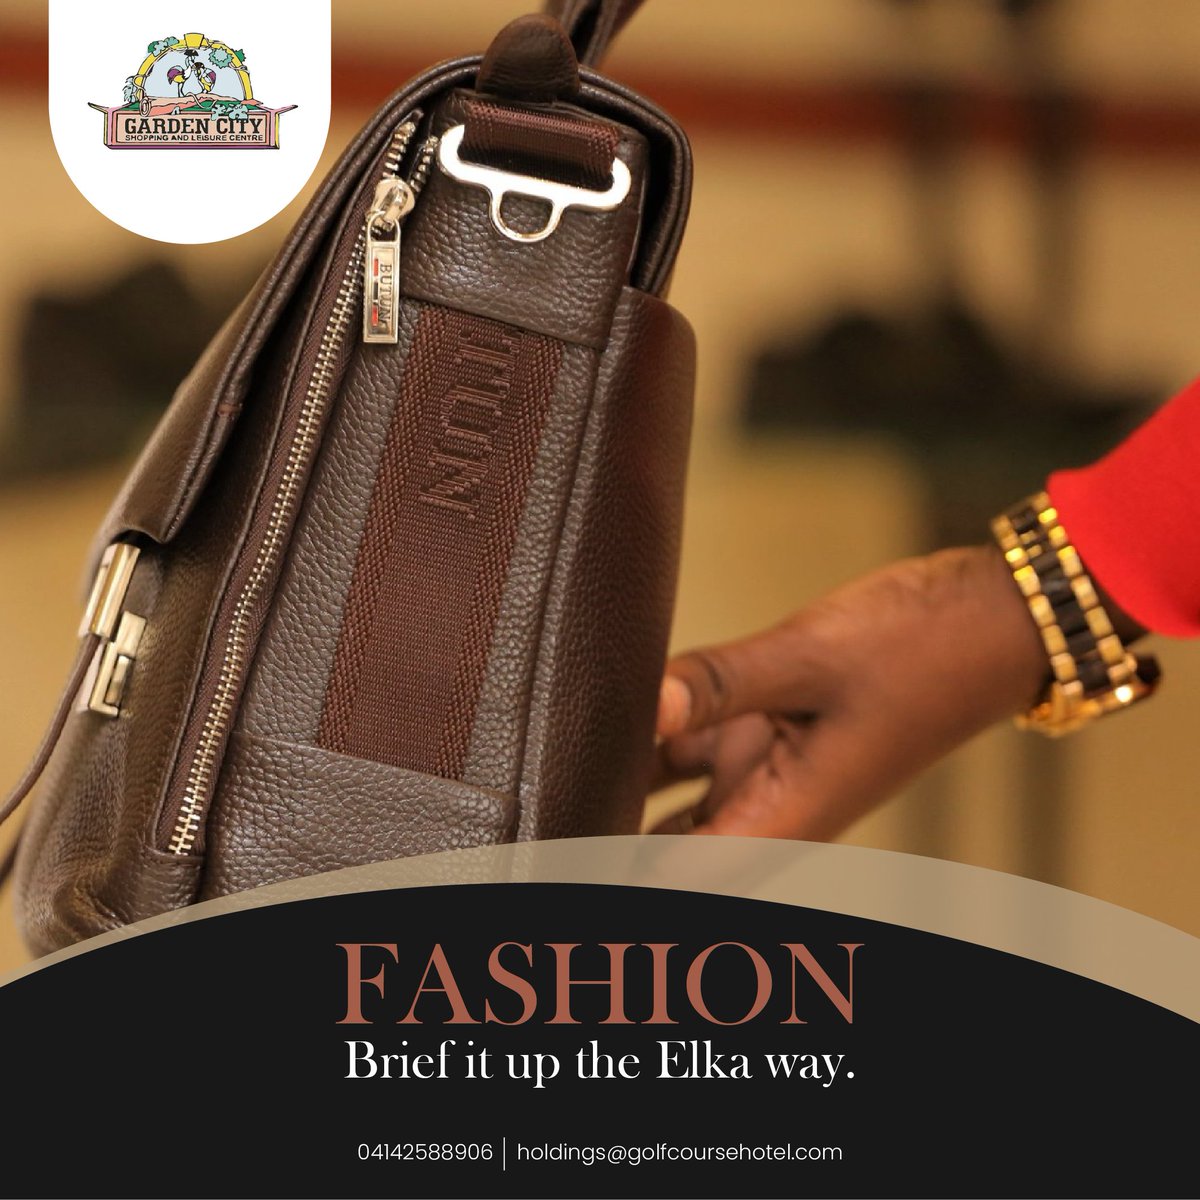 Embrace Elegance and Functionality with Elka Leather's Laptop Bag! 💼✨ Discover the perfect blend of style and utility with an exquisite laptop bag collection.

#ElkaLeather #LaptopBag #StyleAndFunction #ProfessionalEssentials #ElevateYourStyle #FinestCraftsmanship